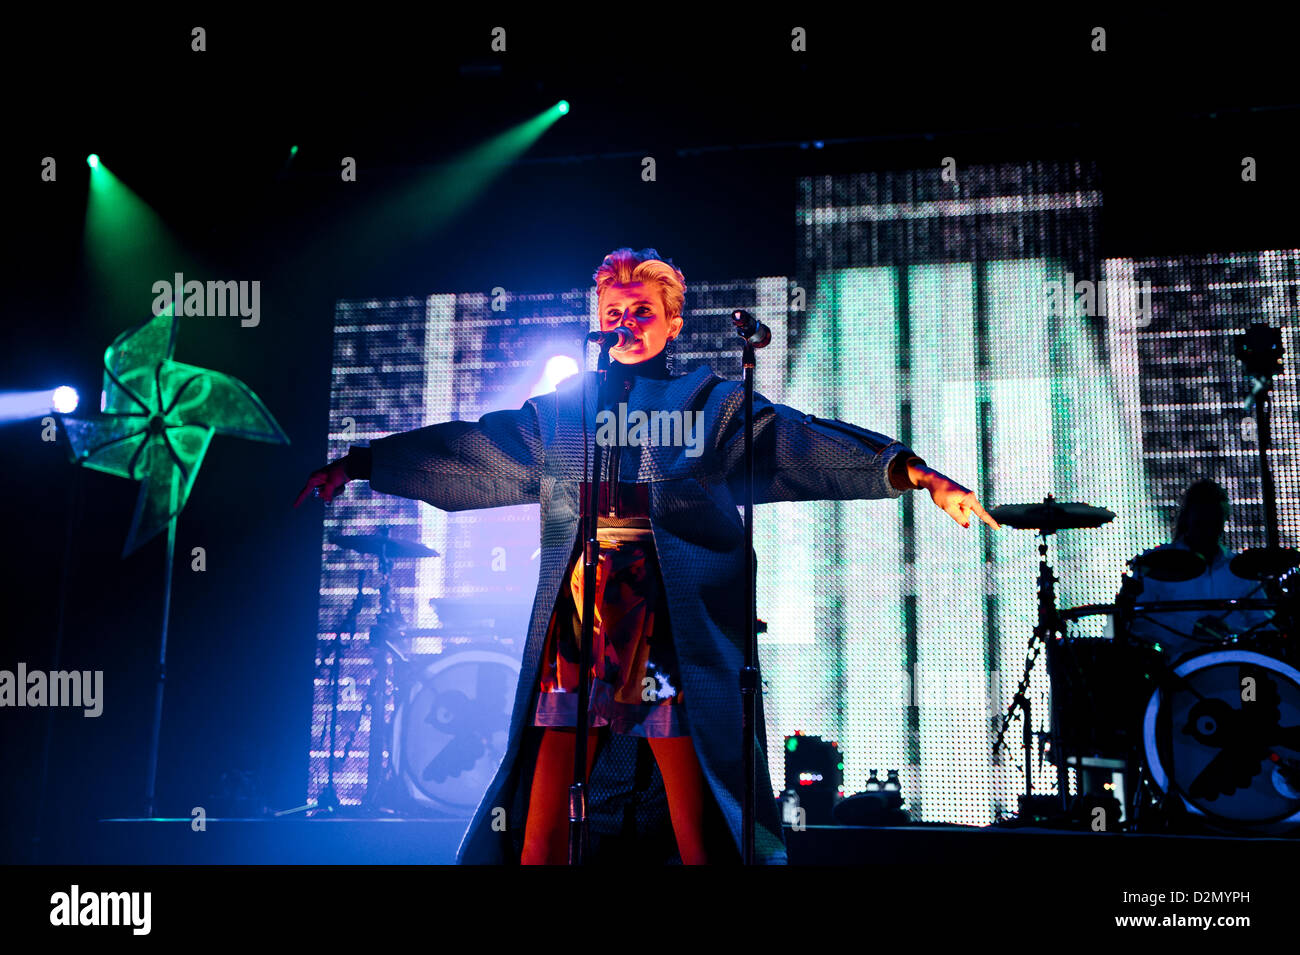 Robyn photographed at Brixton Academy in London, United Kingdom on 1 November 2012. Photo by: Carsten Windhorst Stock Photo